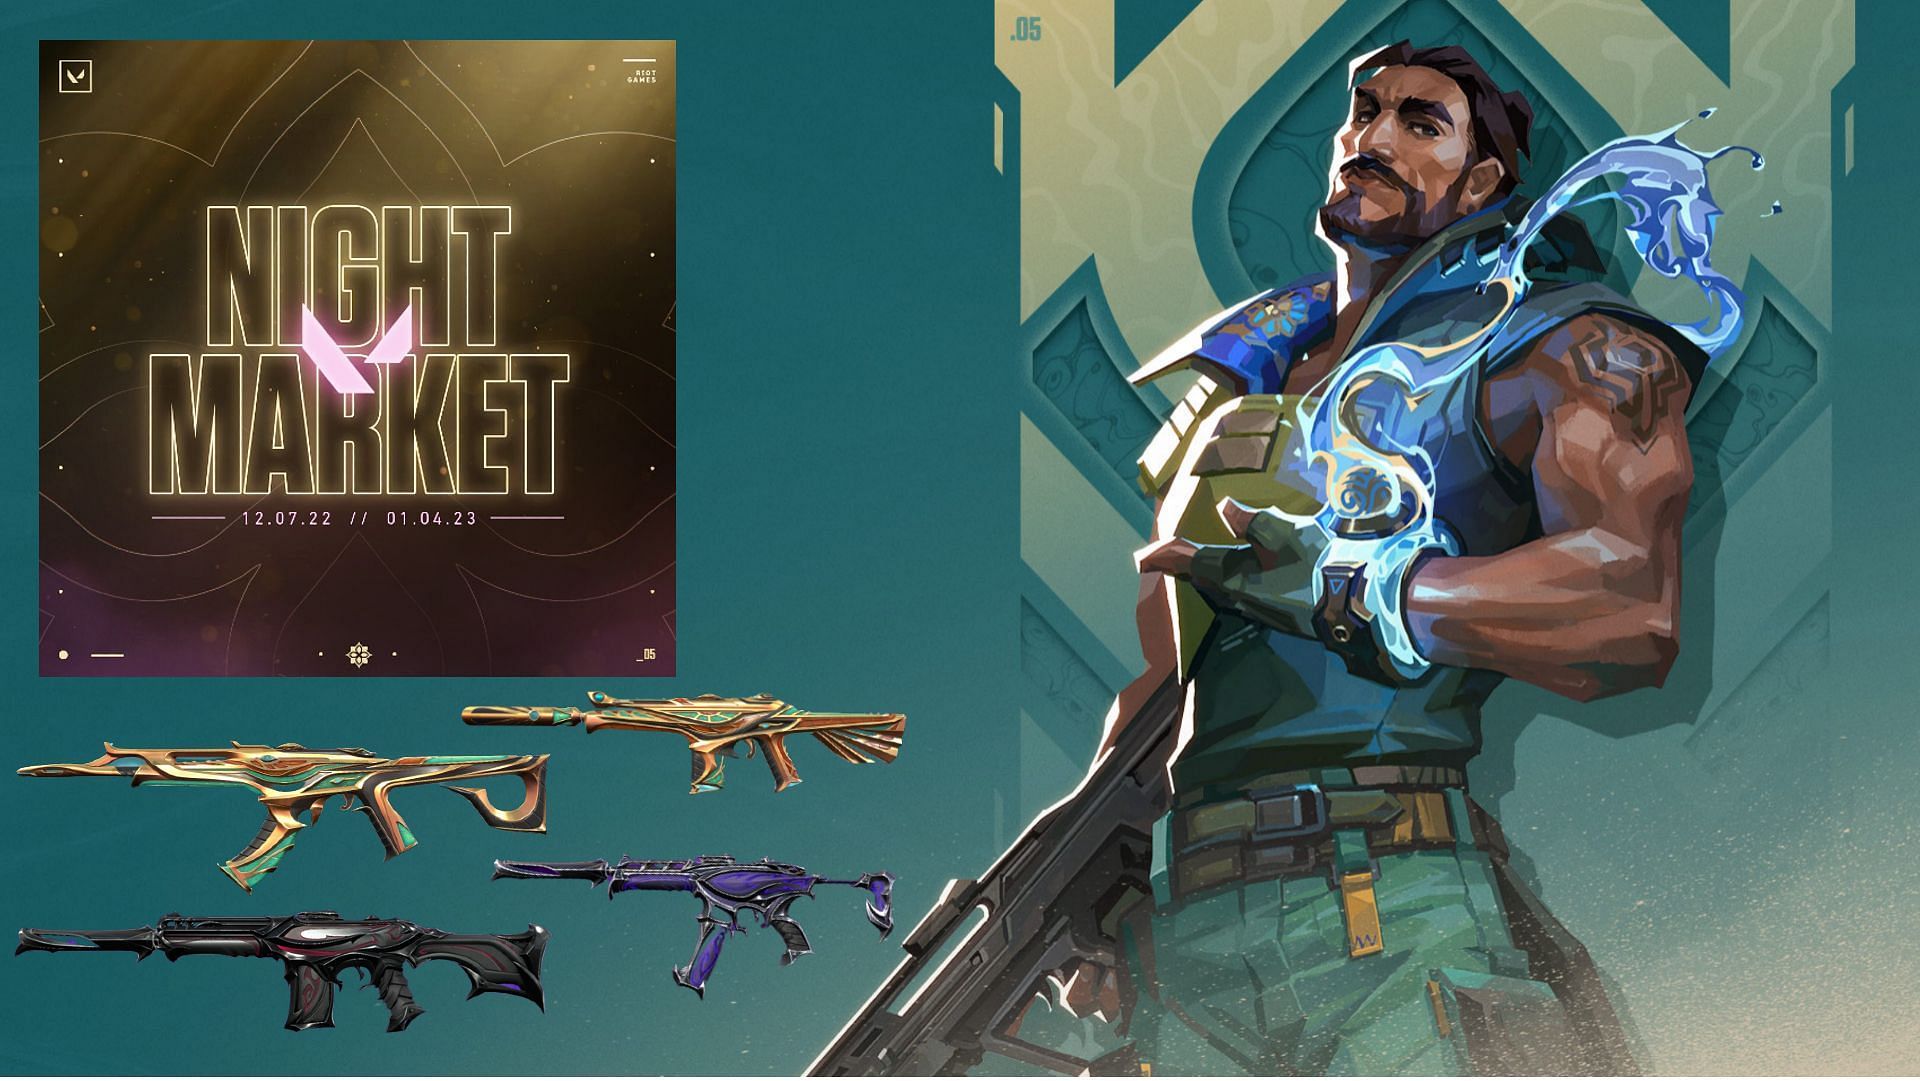 For Episode 5 Act 3, Valorant will shortly host a fresh version of the Night Market. (Images via Riot Games)